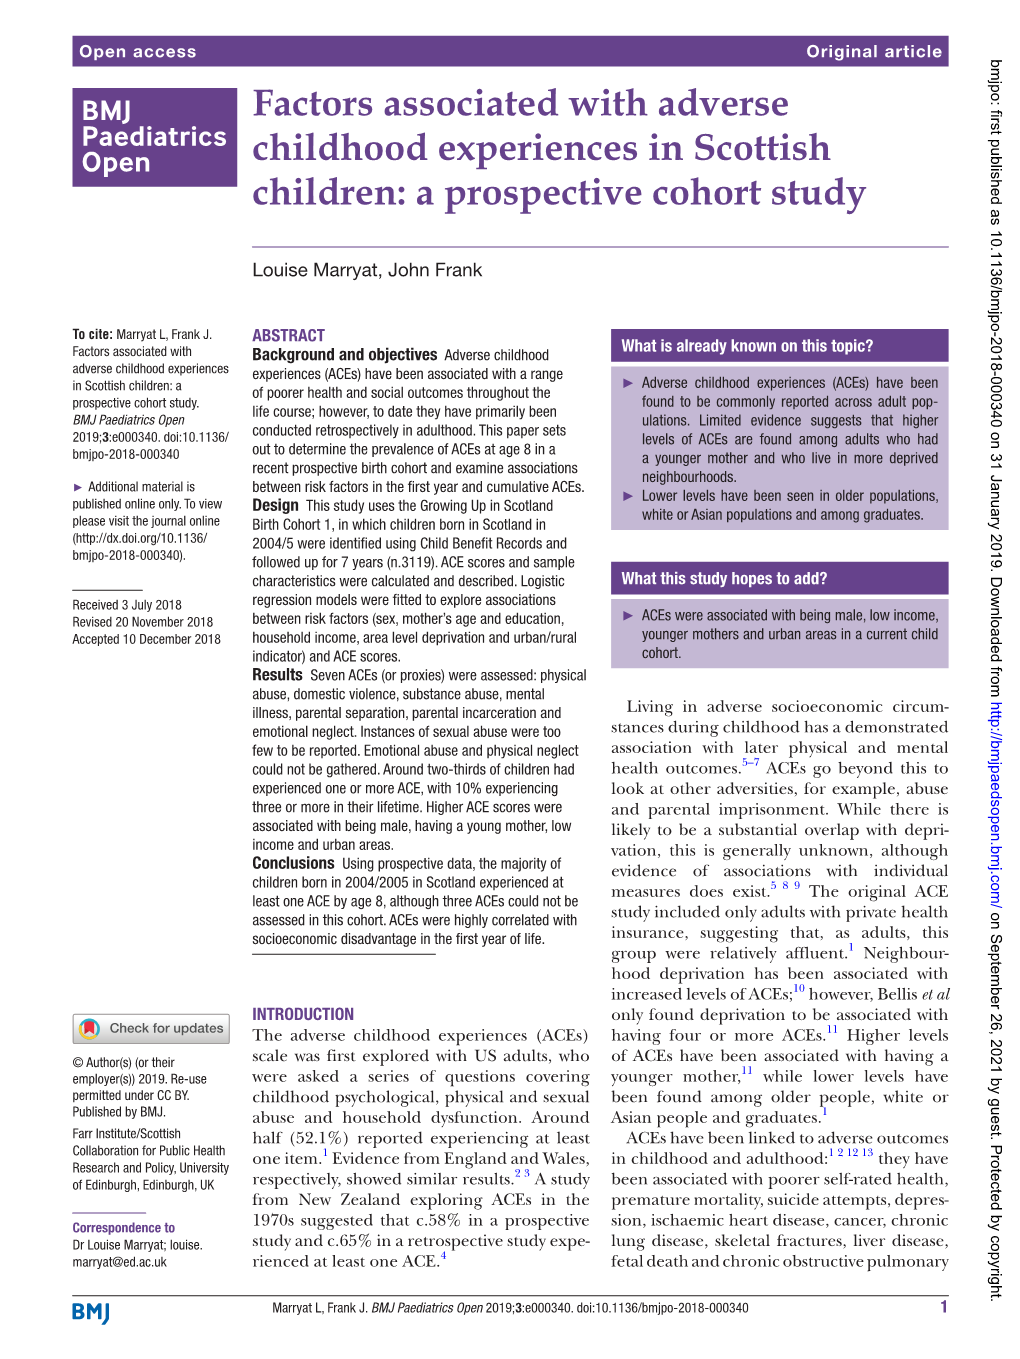 Factors Associated with Adverse Childhood Experiences in Scottish Children: a Prospective Cohort Study